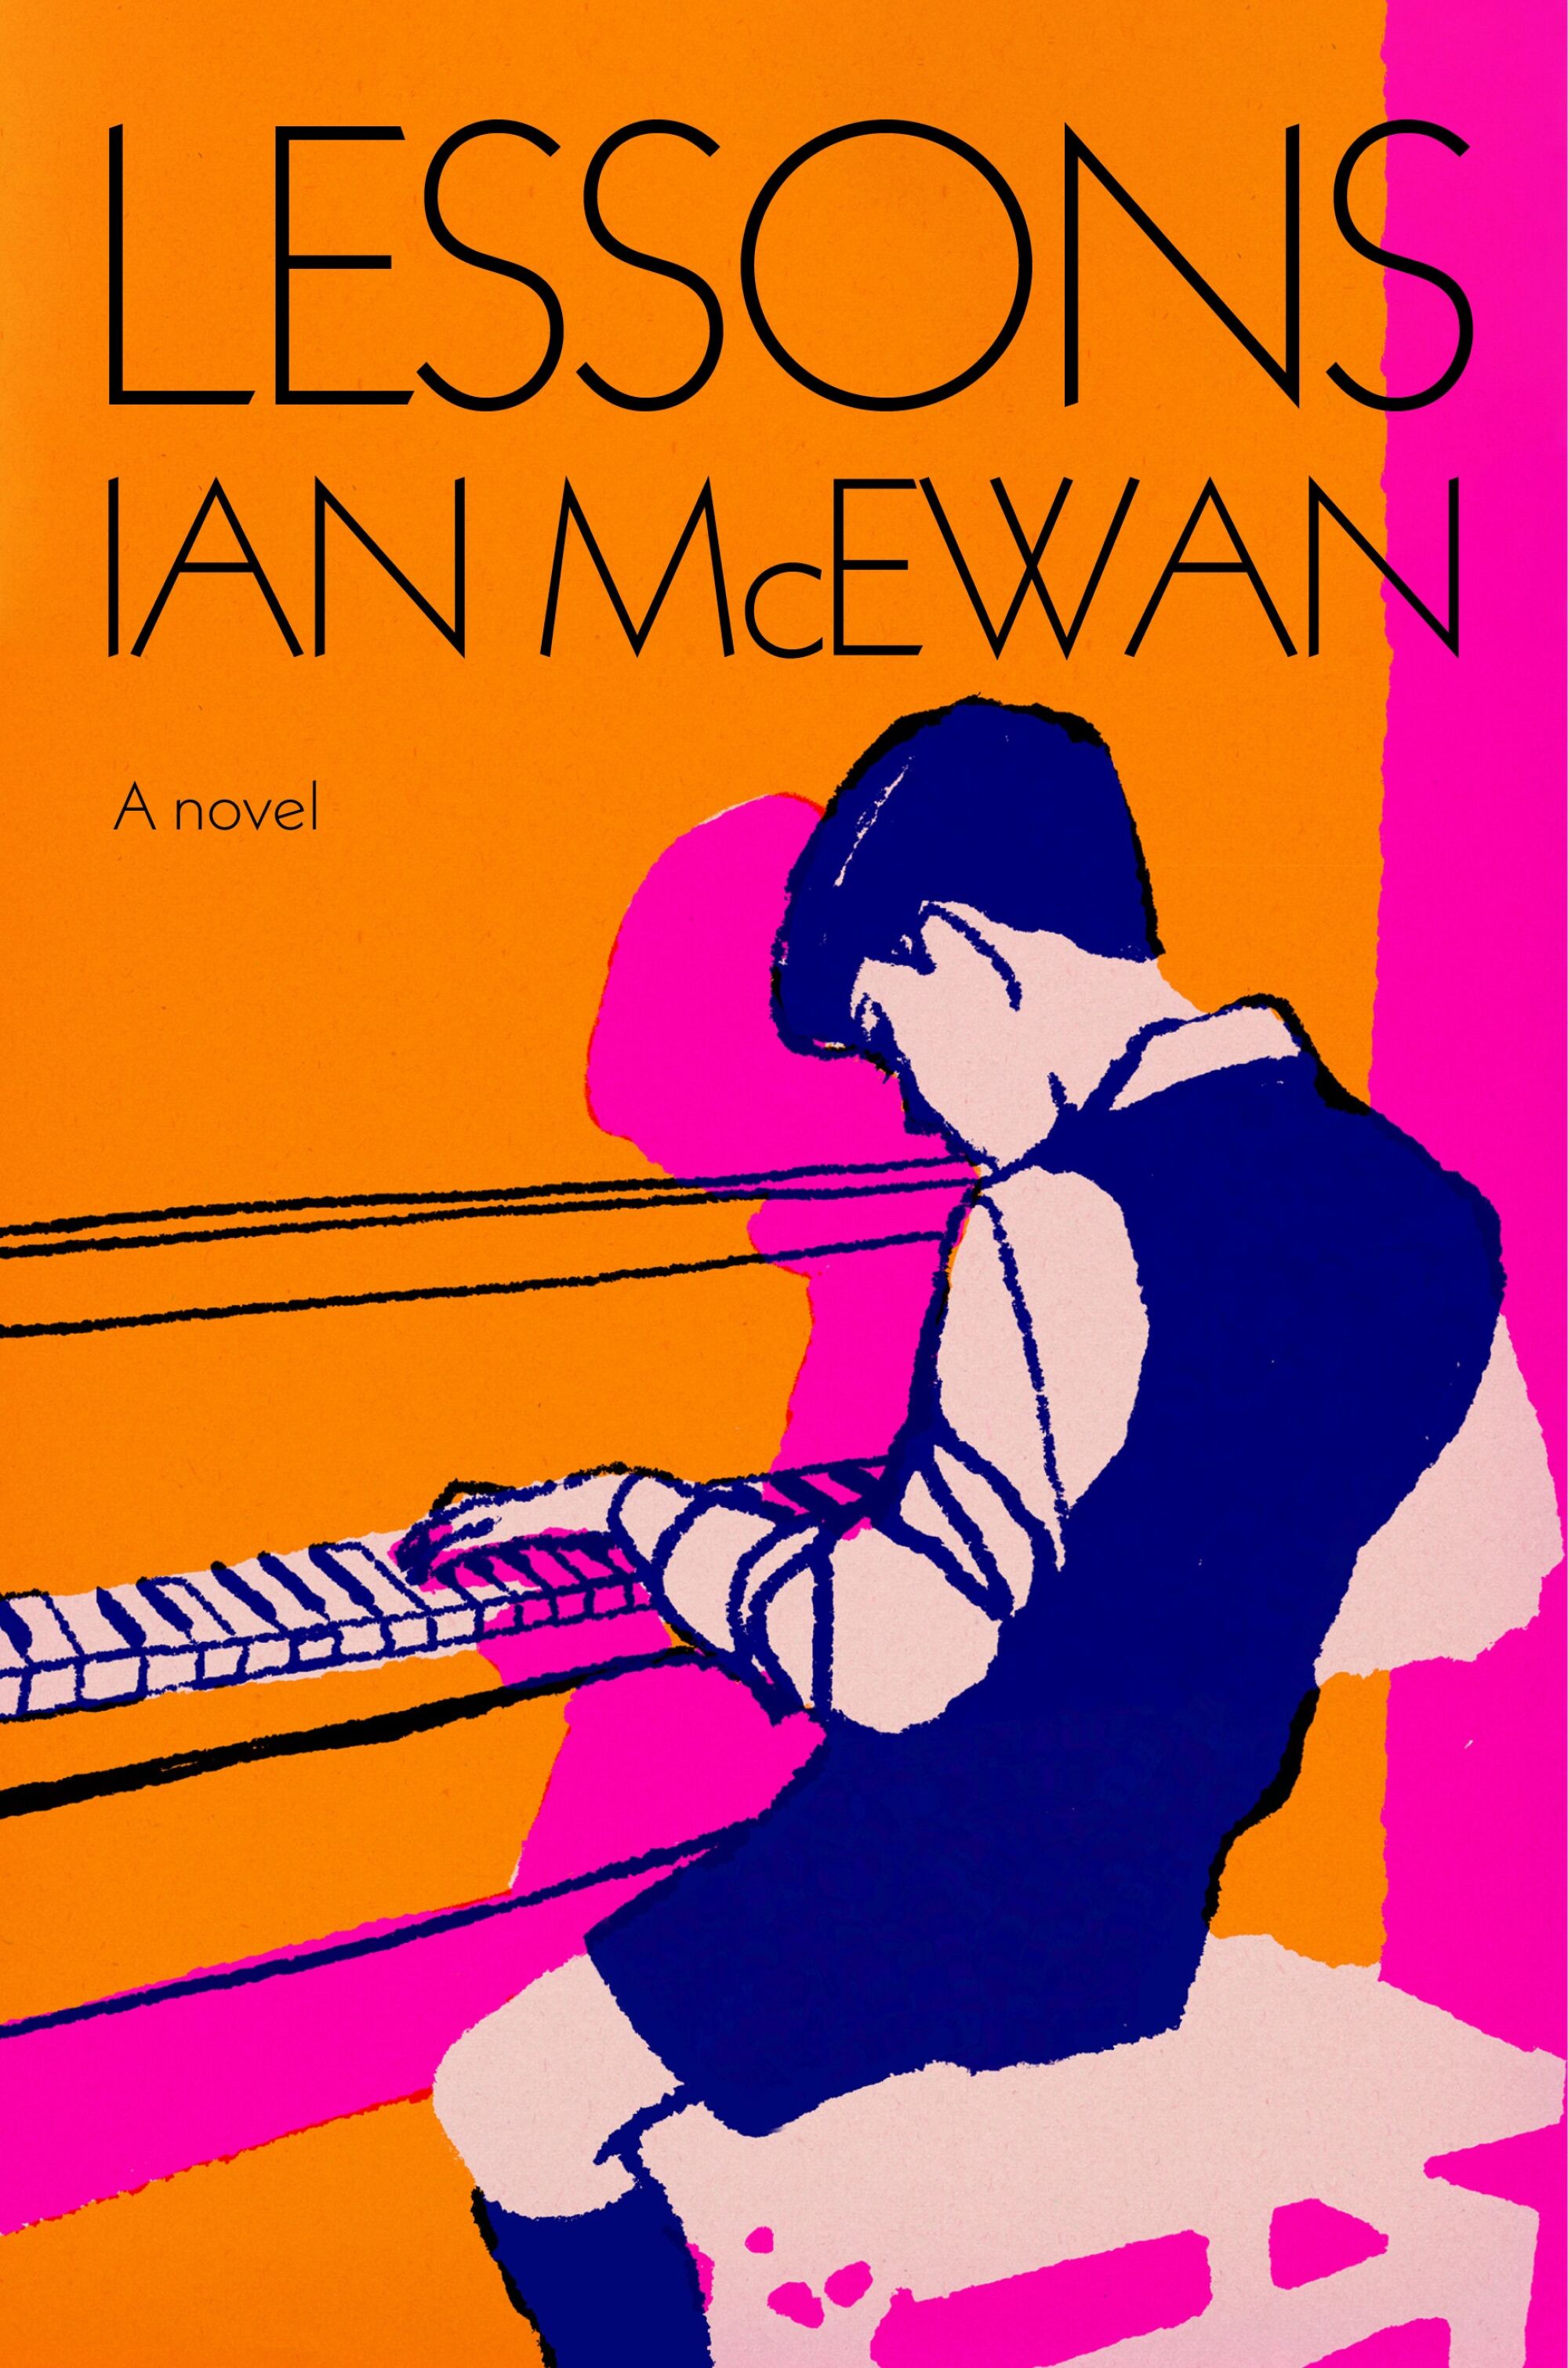 orange and pink illustration of boy playing the piano on cover of "Lessons: A Novel" by Ian McEwan